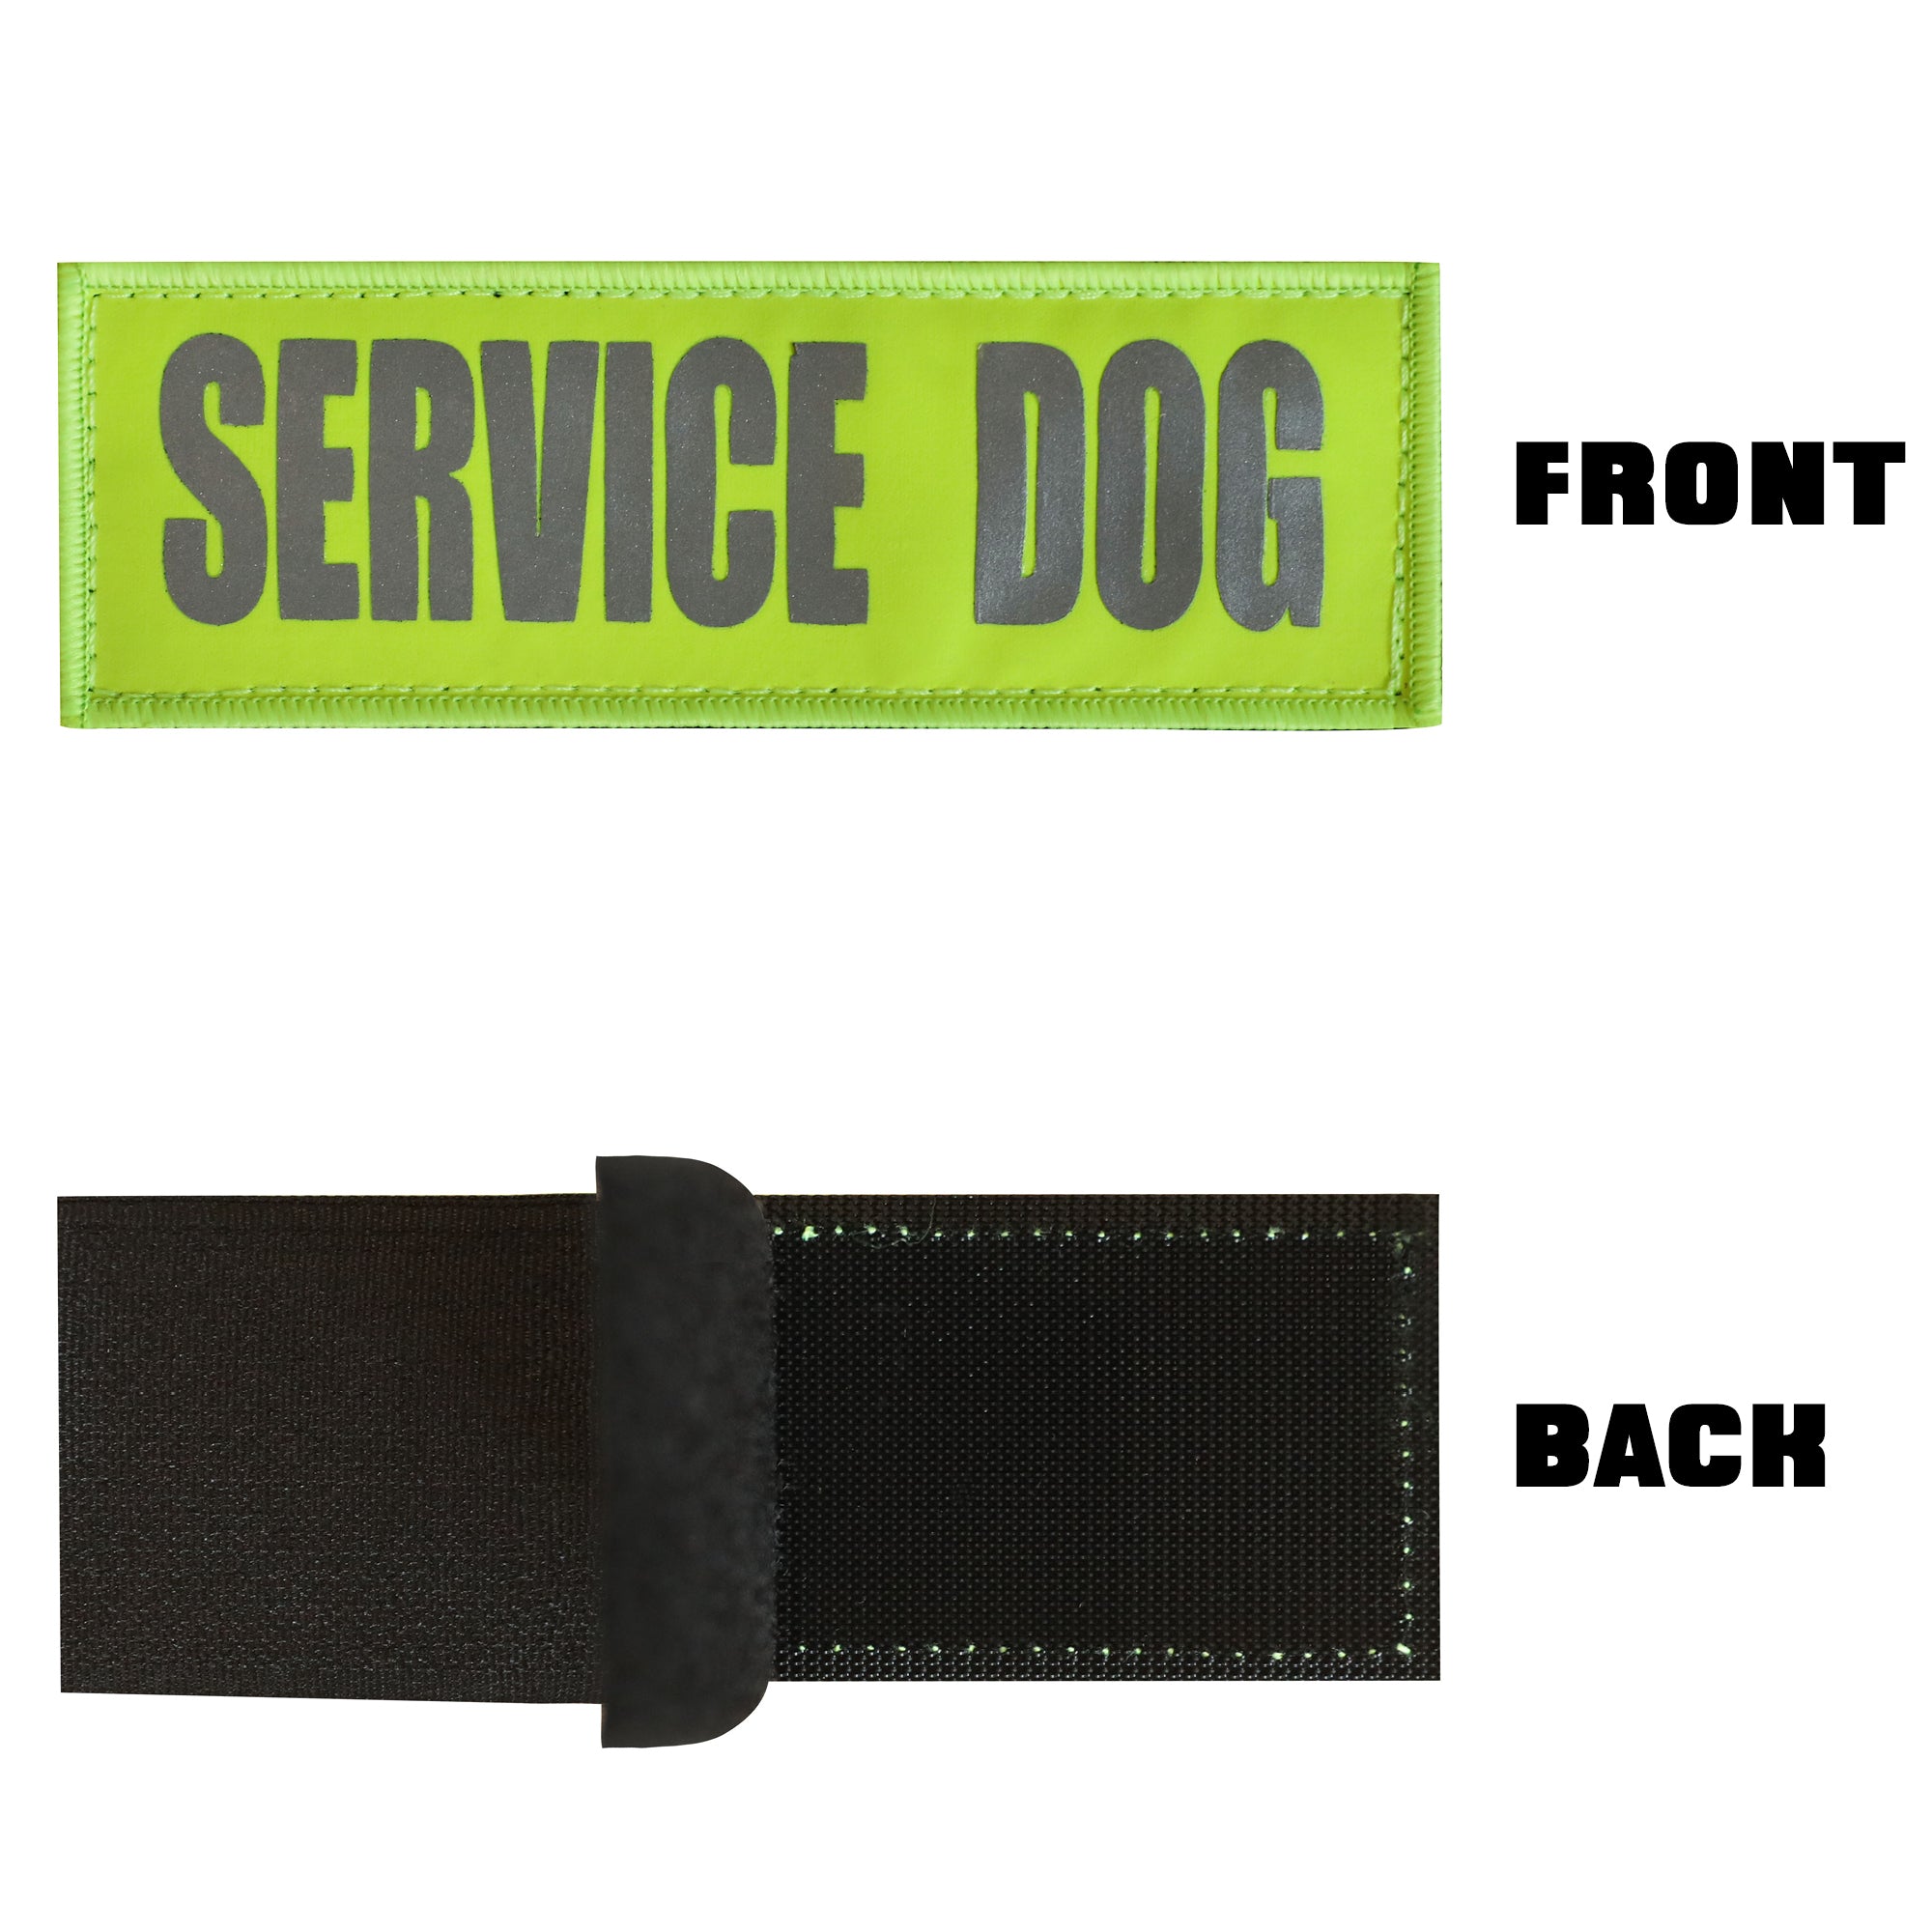 10pcs 3d Reflective Velcro Patch Service Dog In Training Do Not